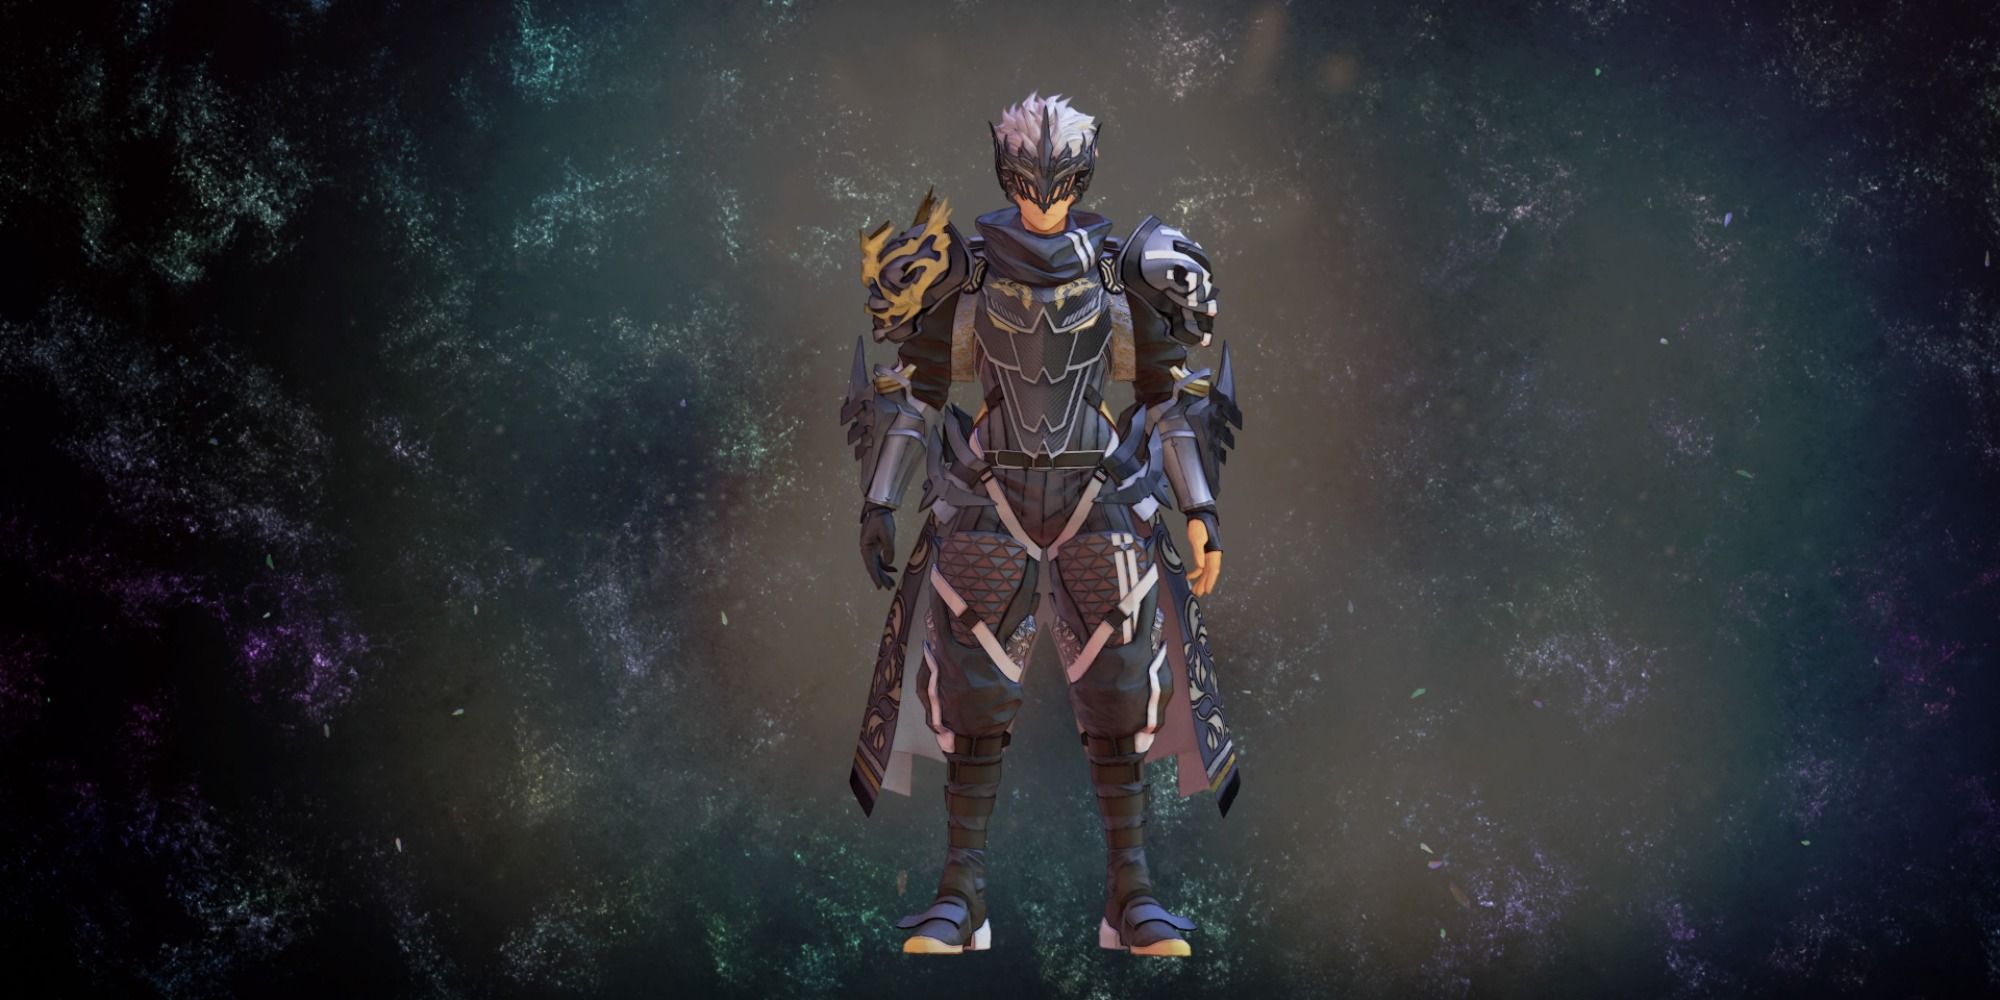 SW-EQ01M Outfit for Alphen in Tales of Arise